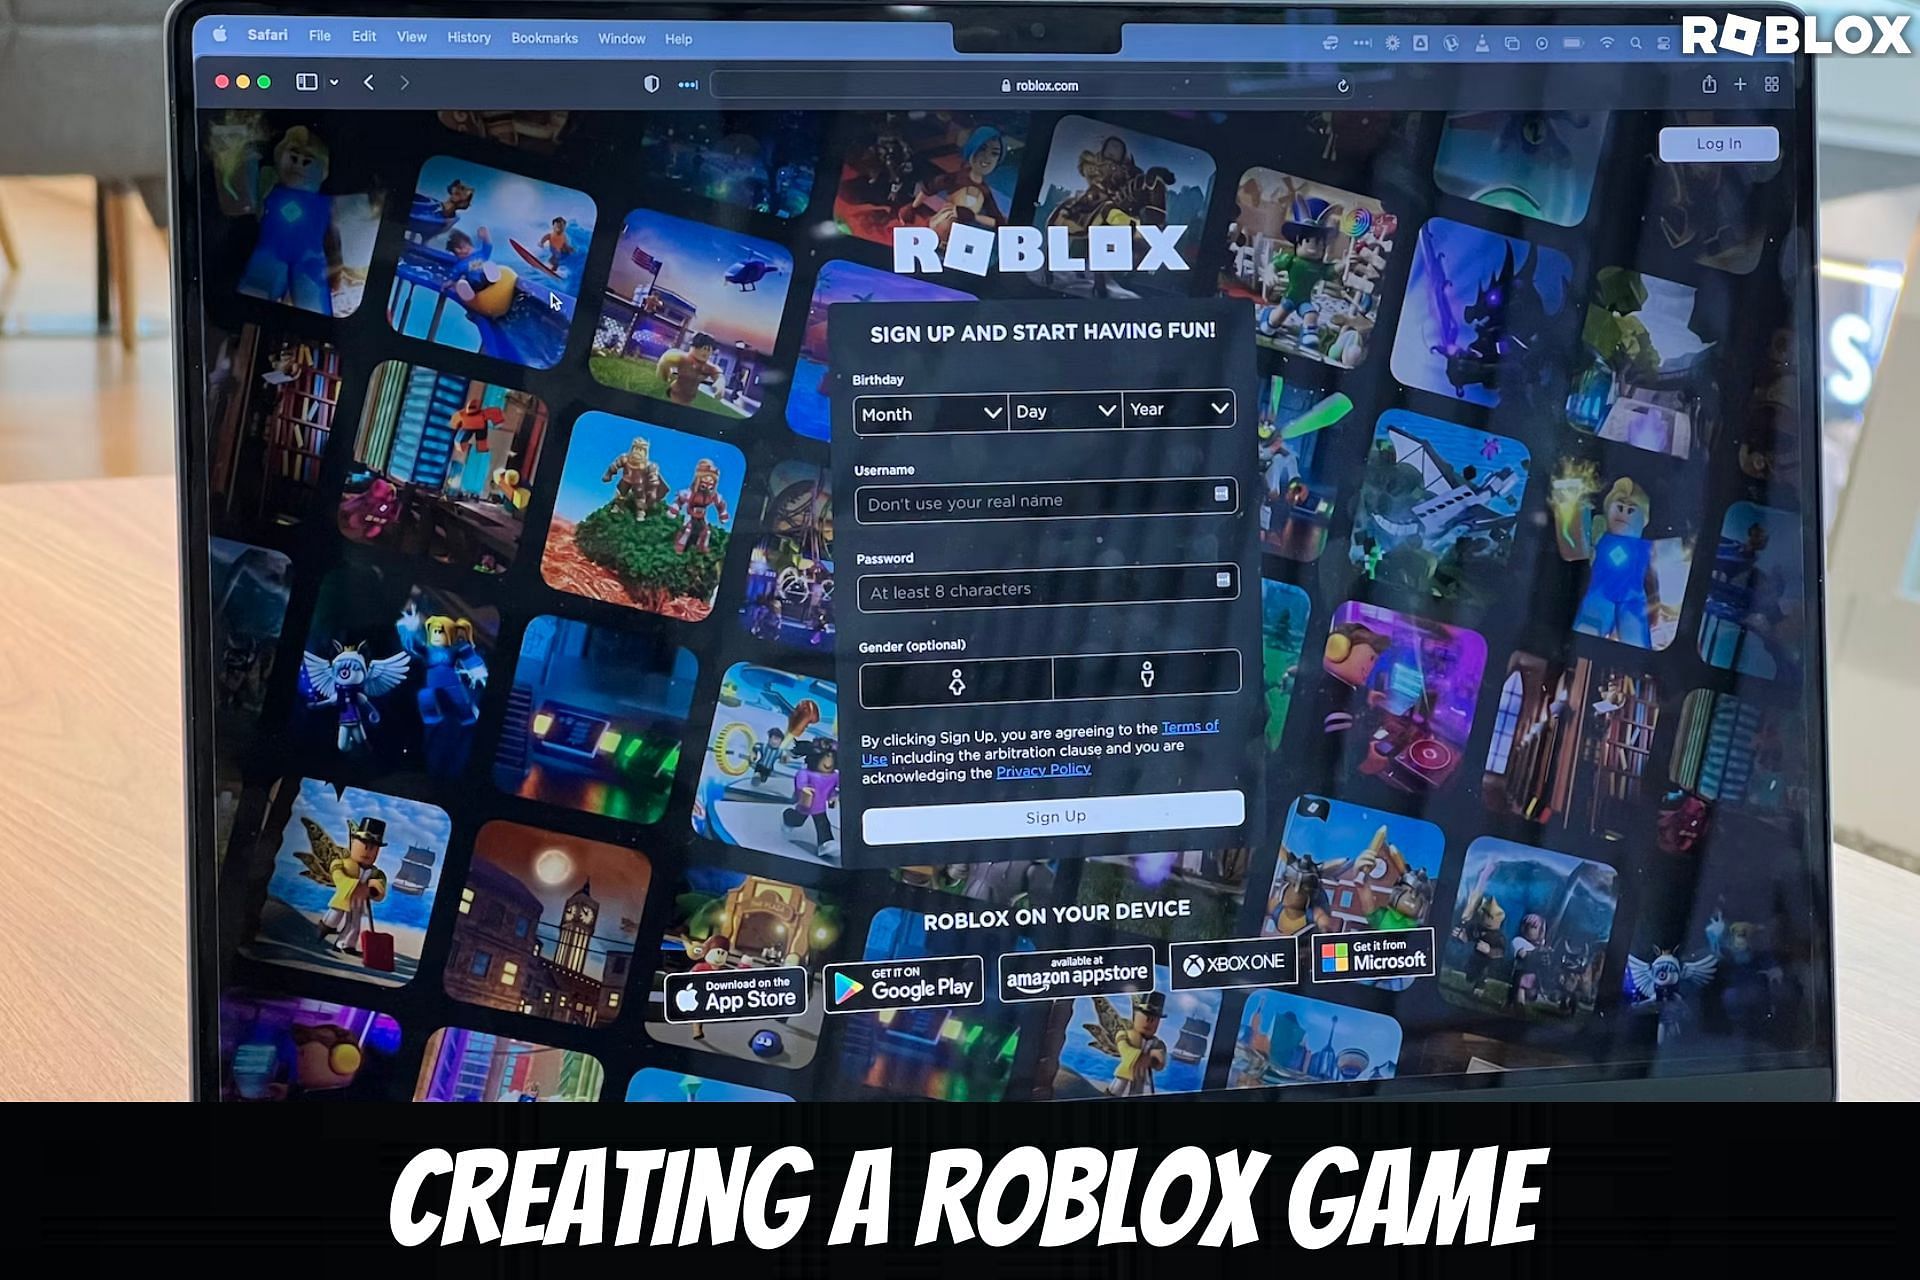 How to Share & Publish Your Roblox Game in 3 Steps